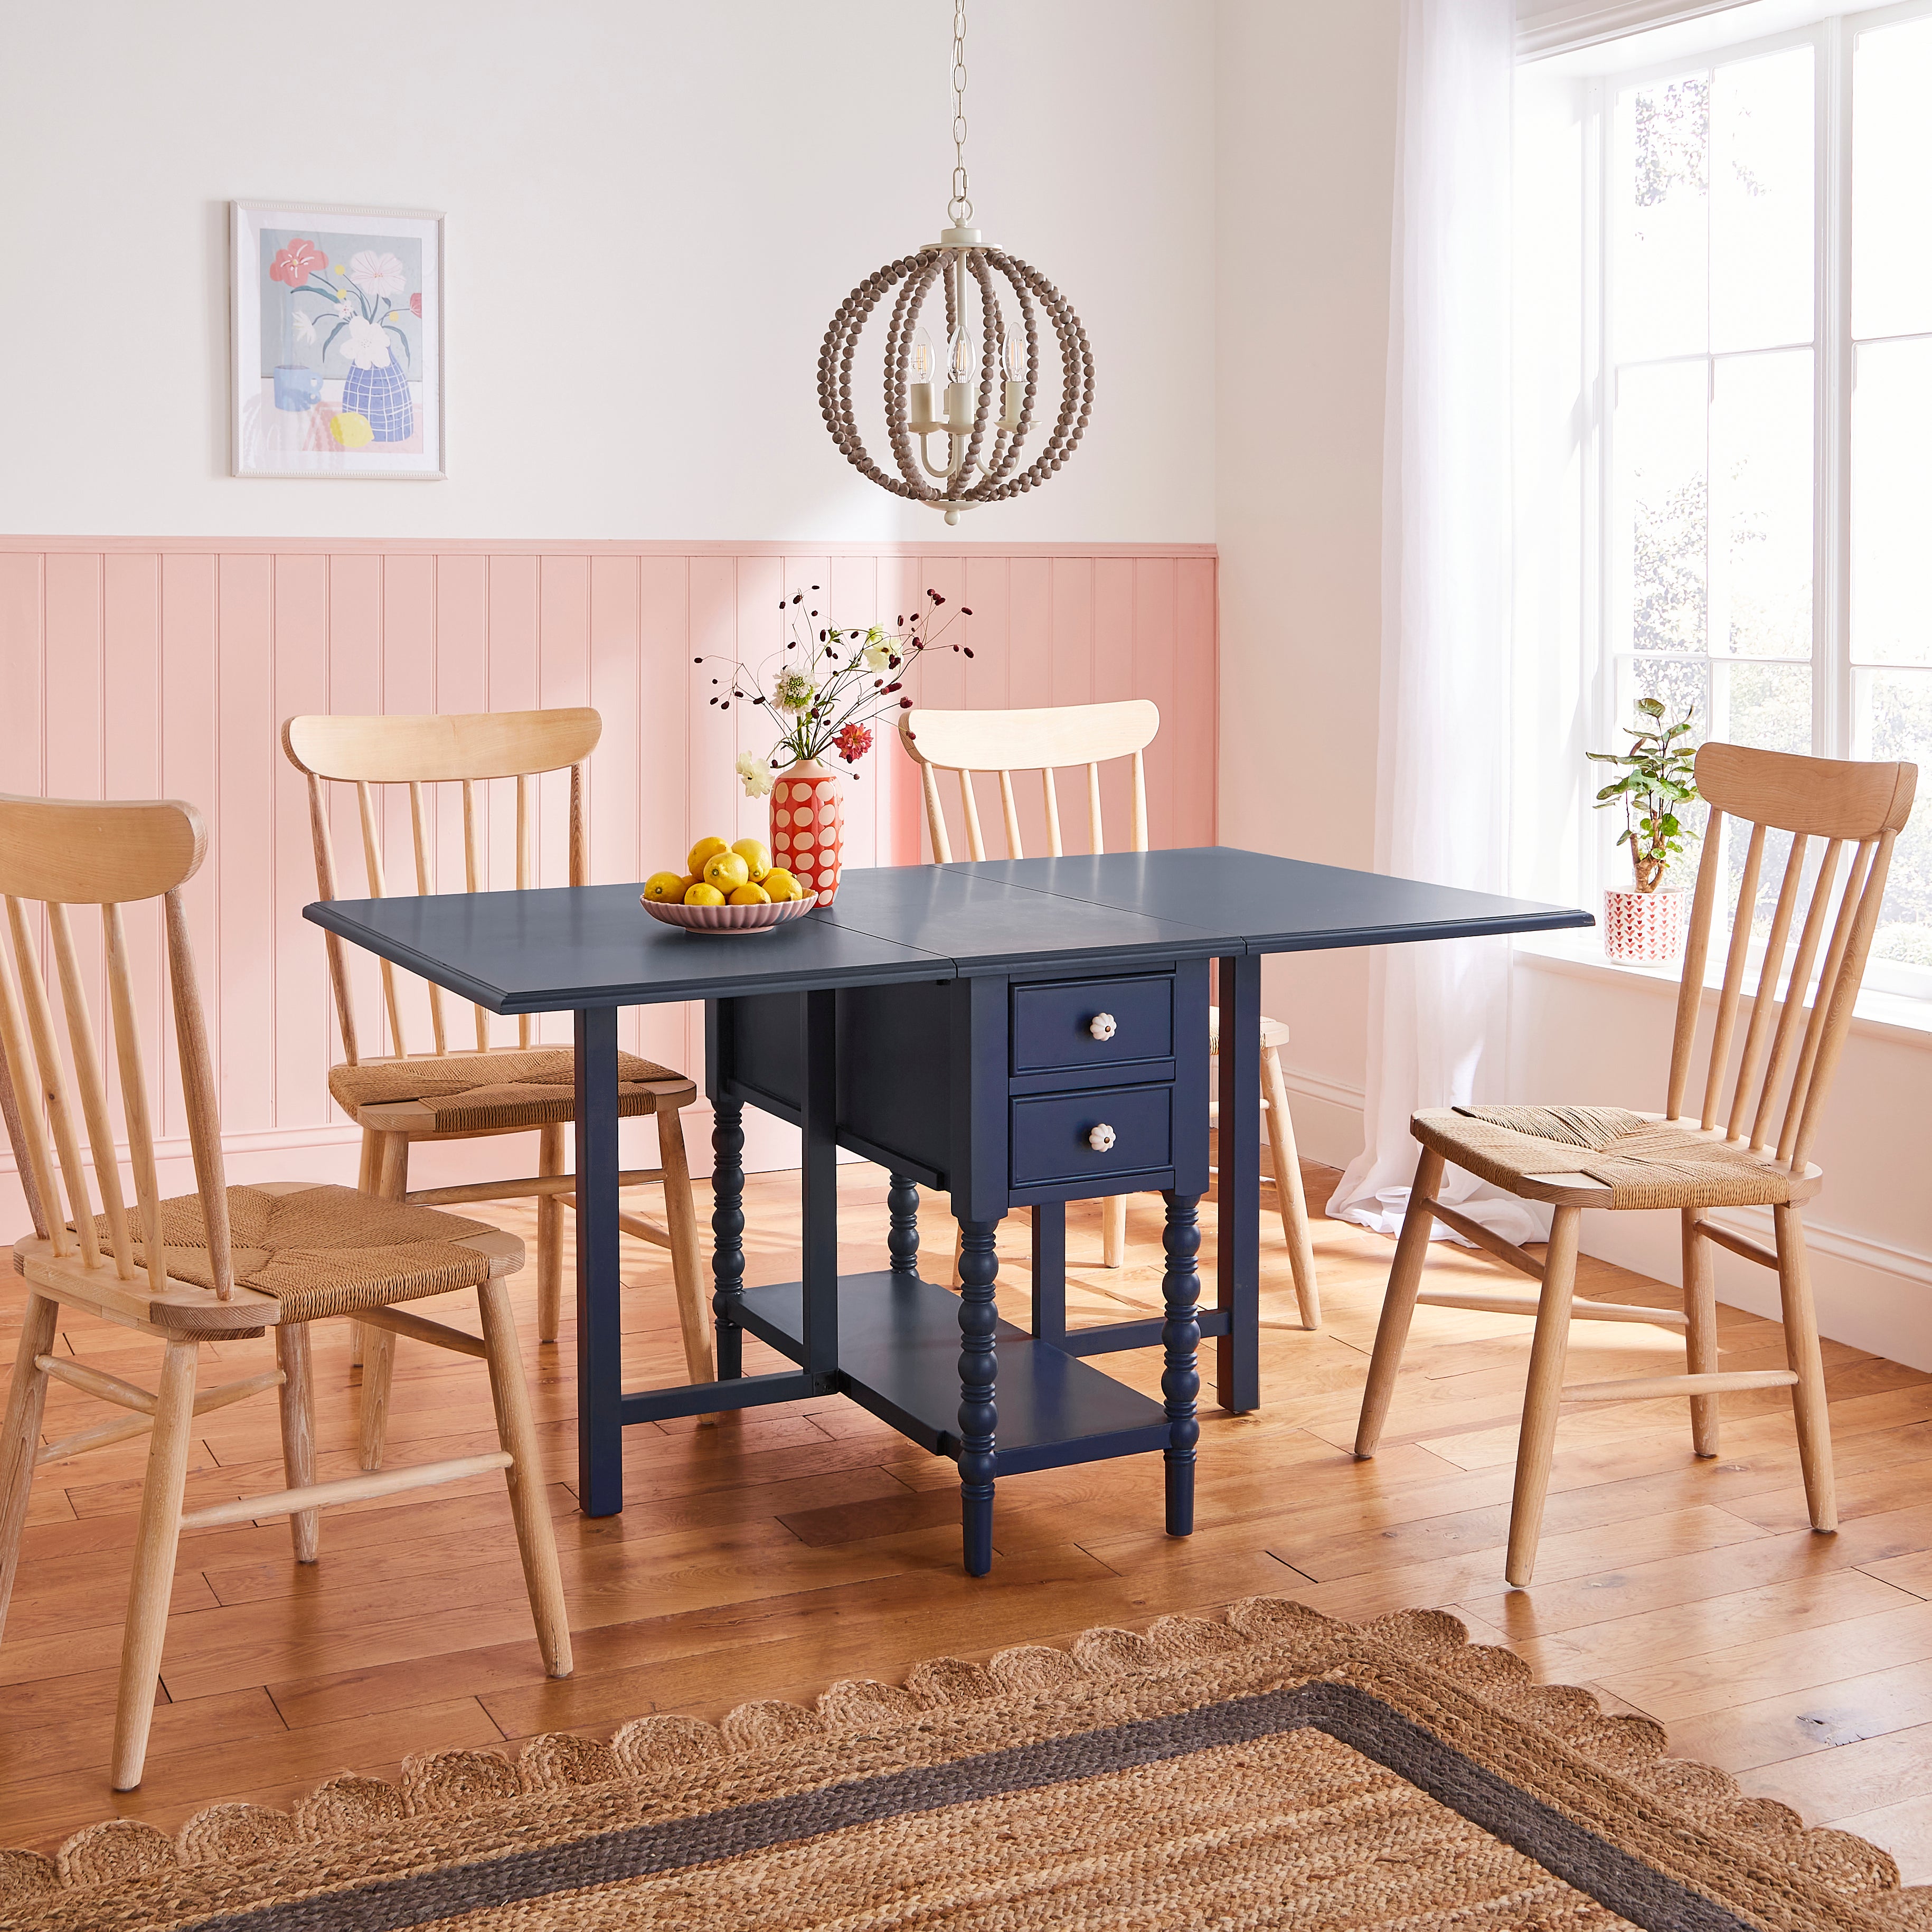 Pippin 2 4 Seater Drop Leaf Dining Table Navy Navy